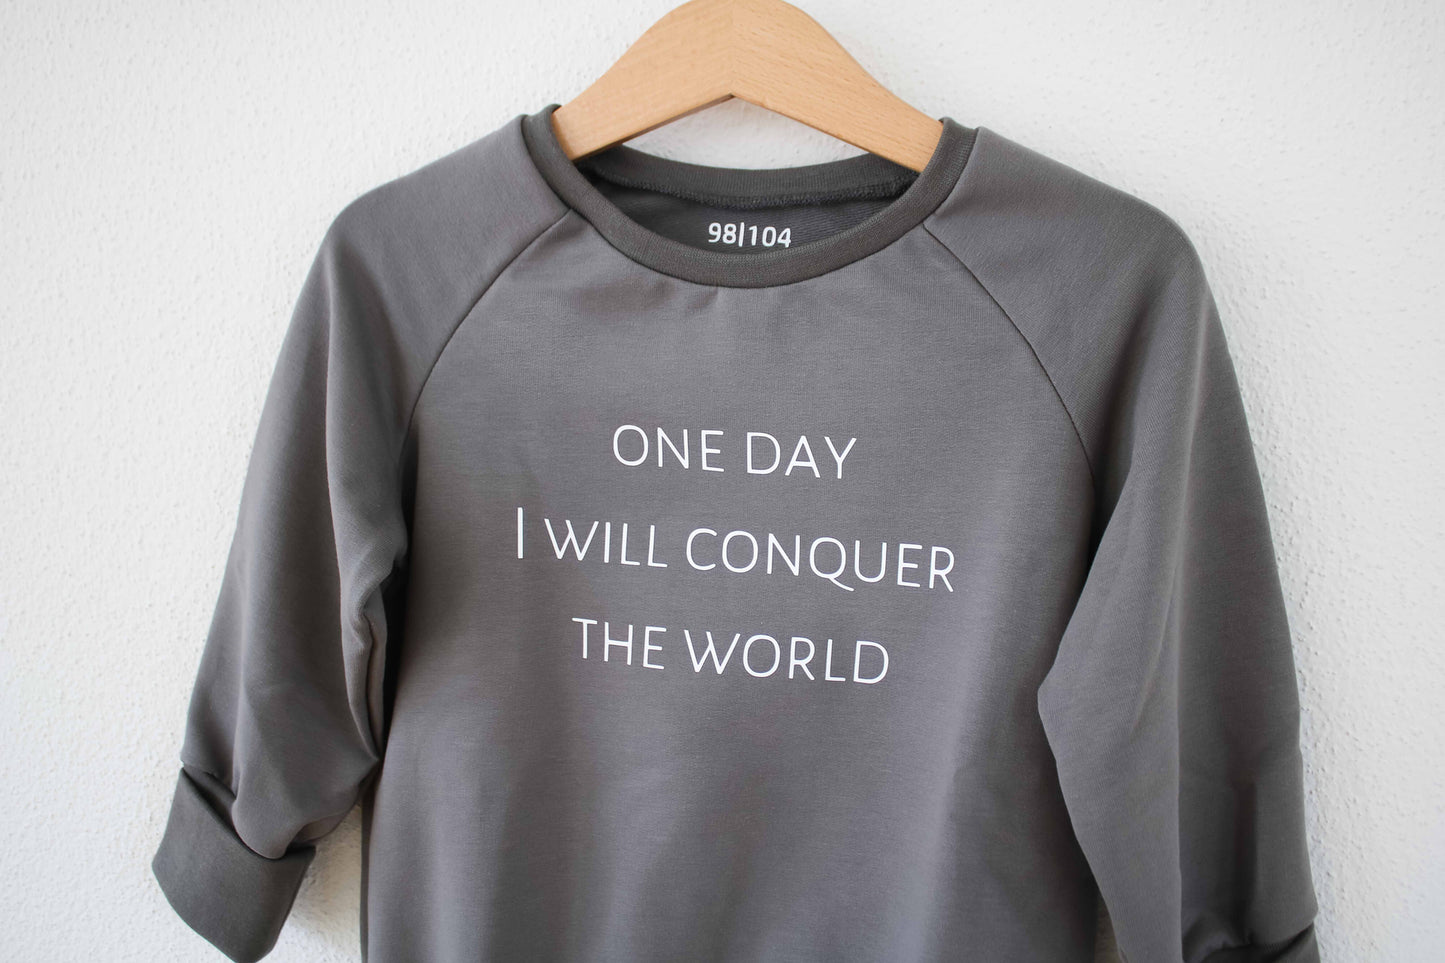 Sweater "one day I will conquer the world" (Taupe Grau/Beige)